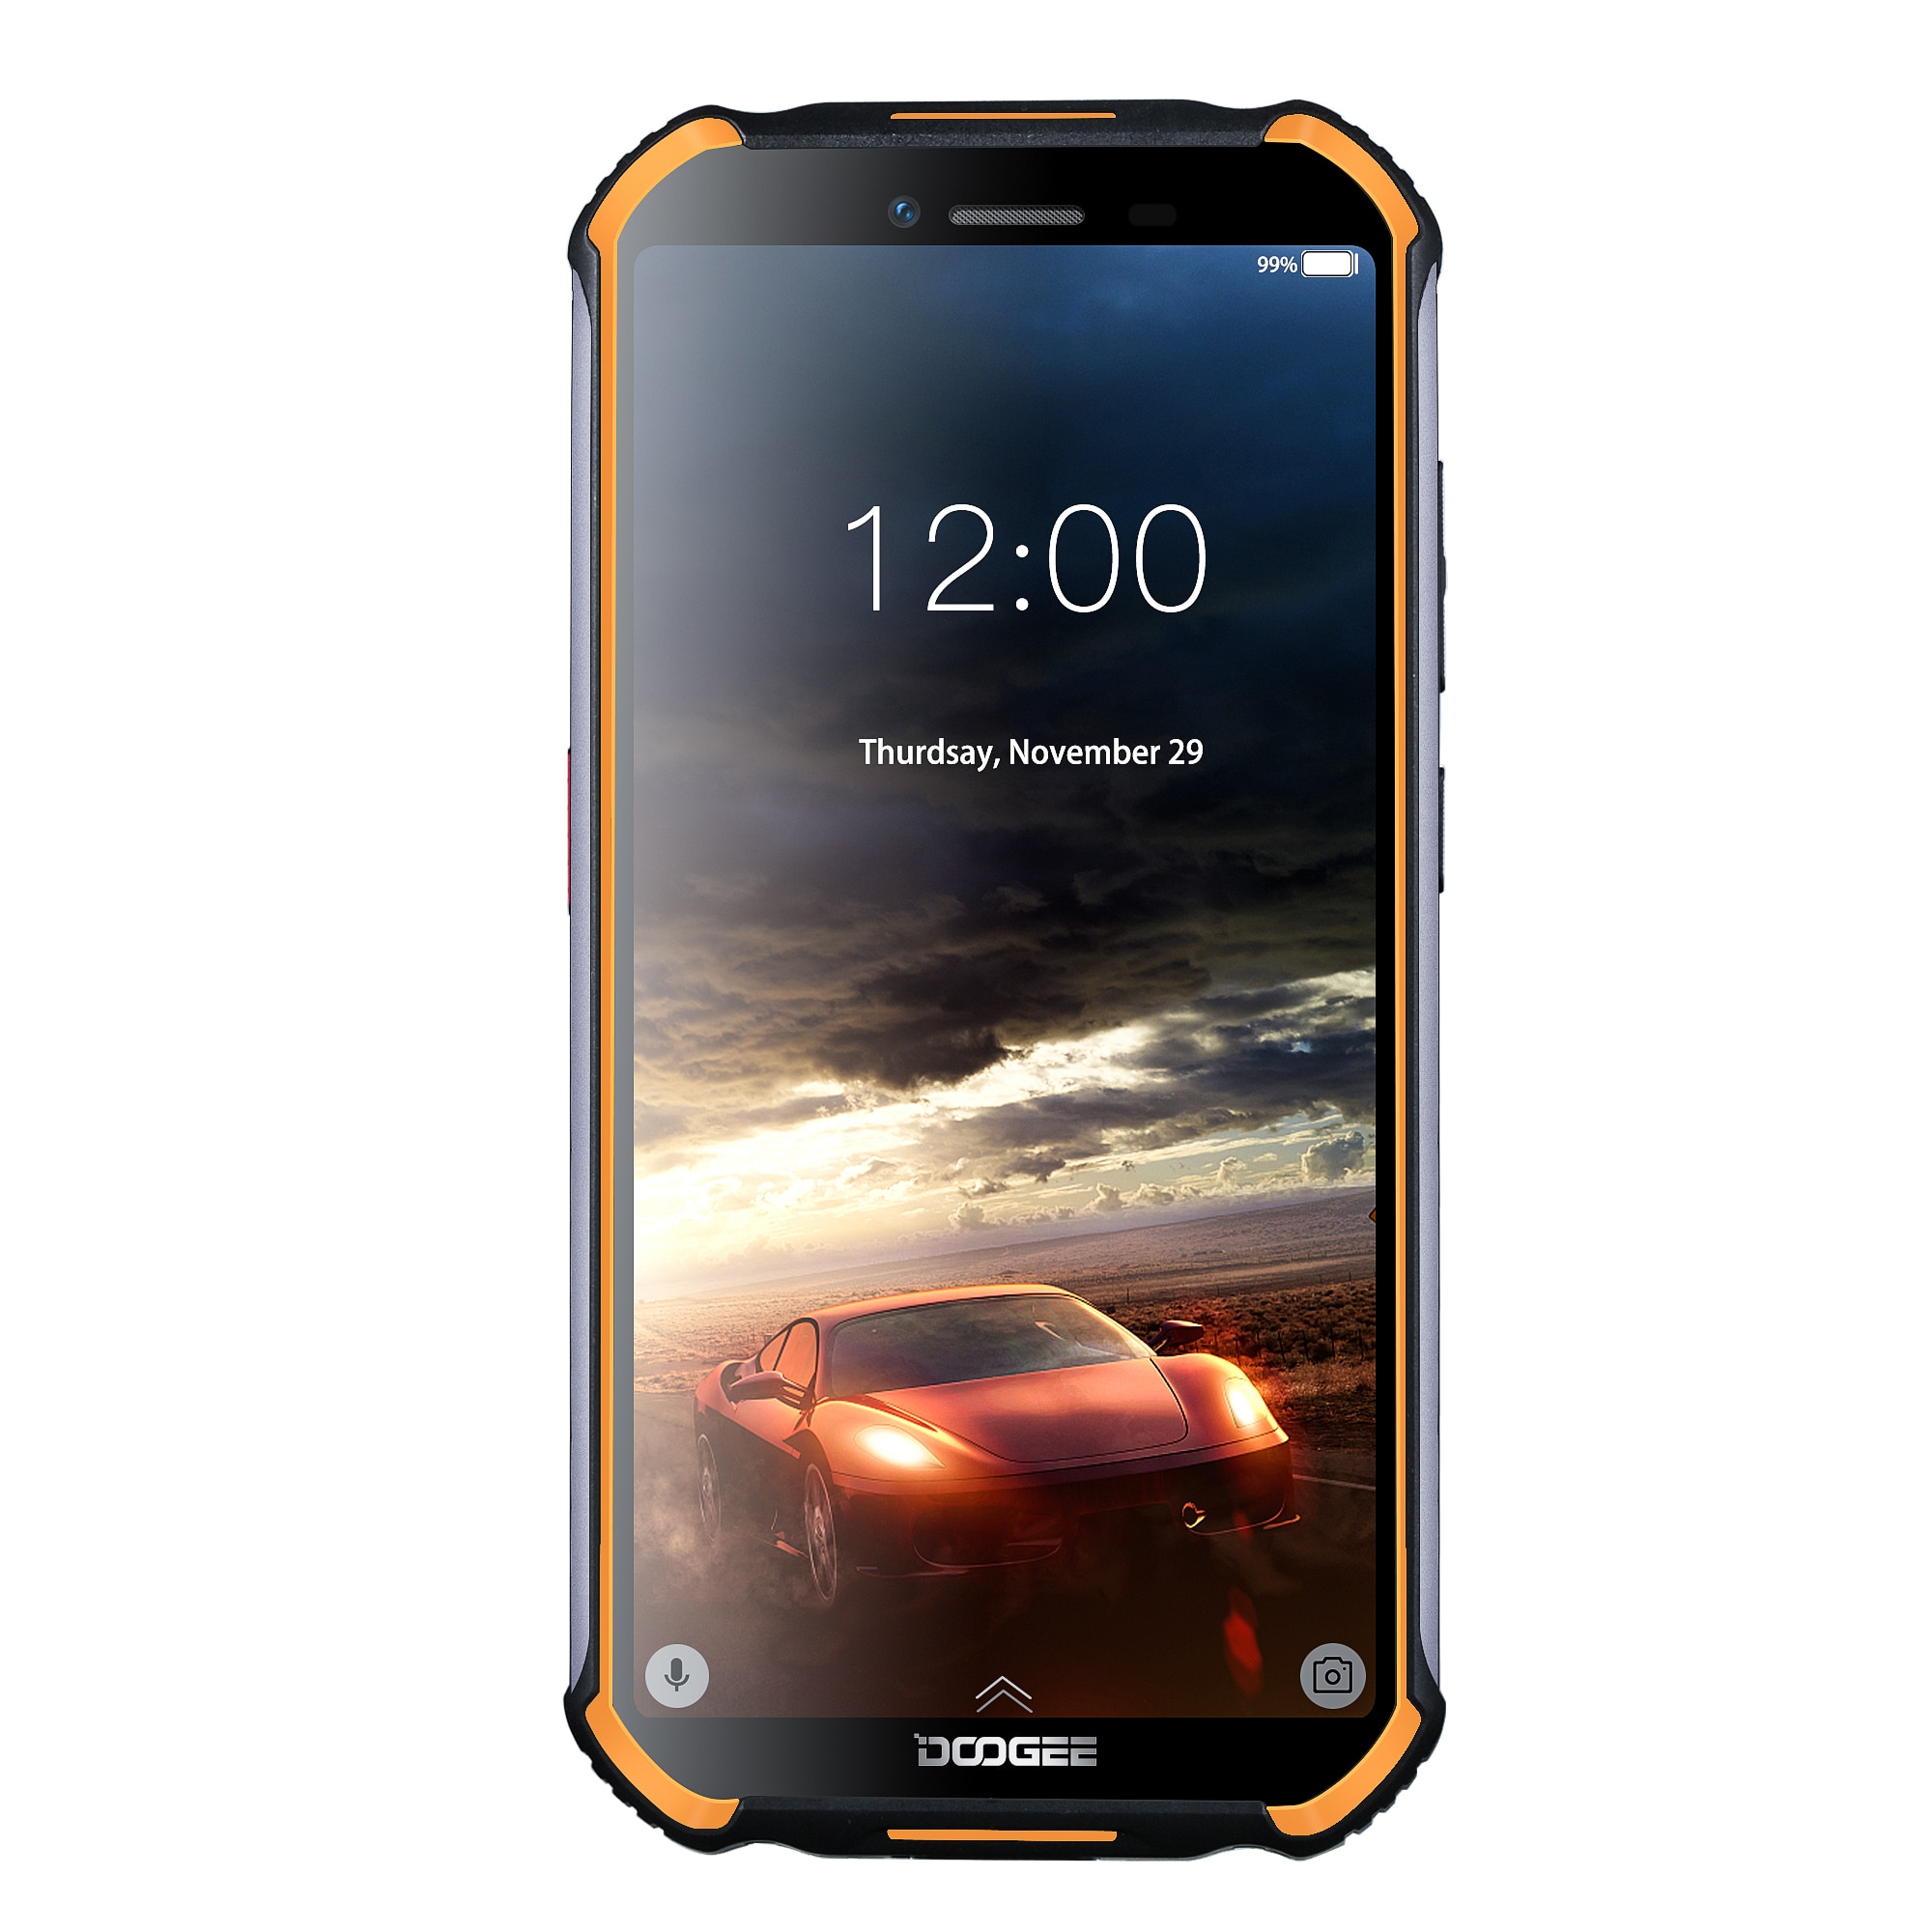 DOOGEE S40 Android 9.0 4G Network Rugged Mobile Phone 5.5inch Cell Phone MT6739 Quad Core 3GB RAM 32GB ROM 8.0MP IP68/IP69K